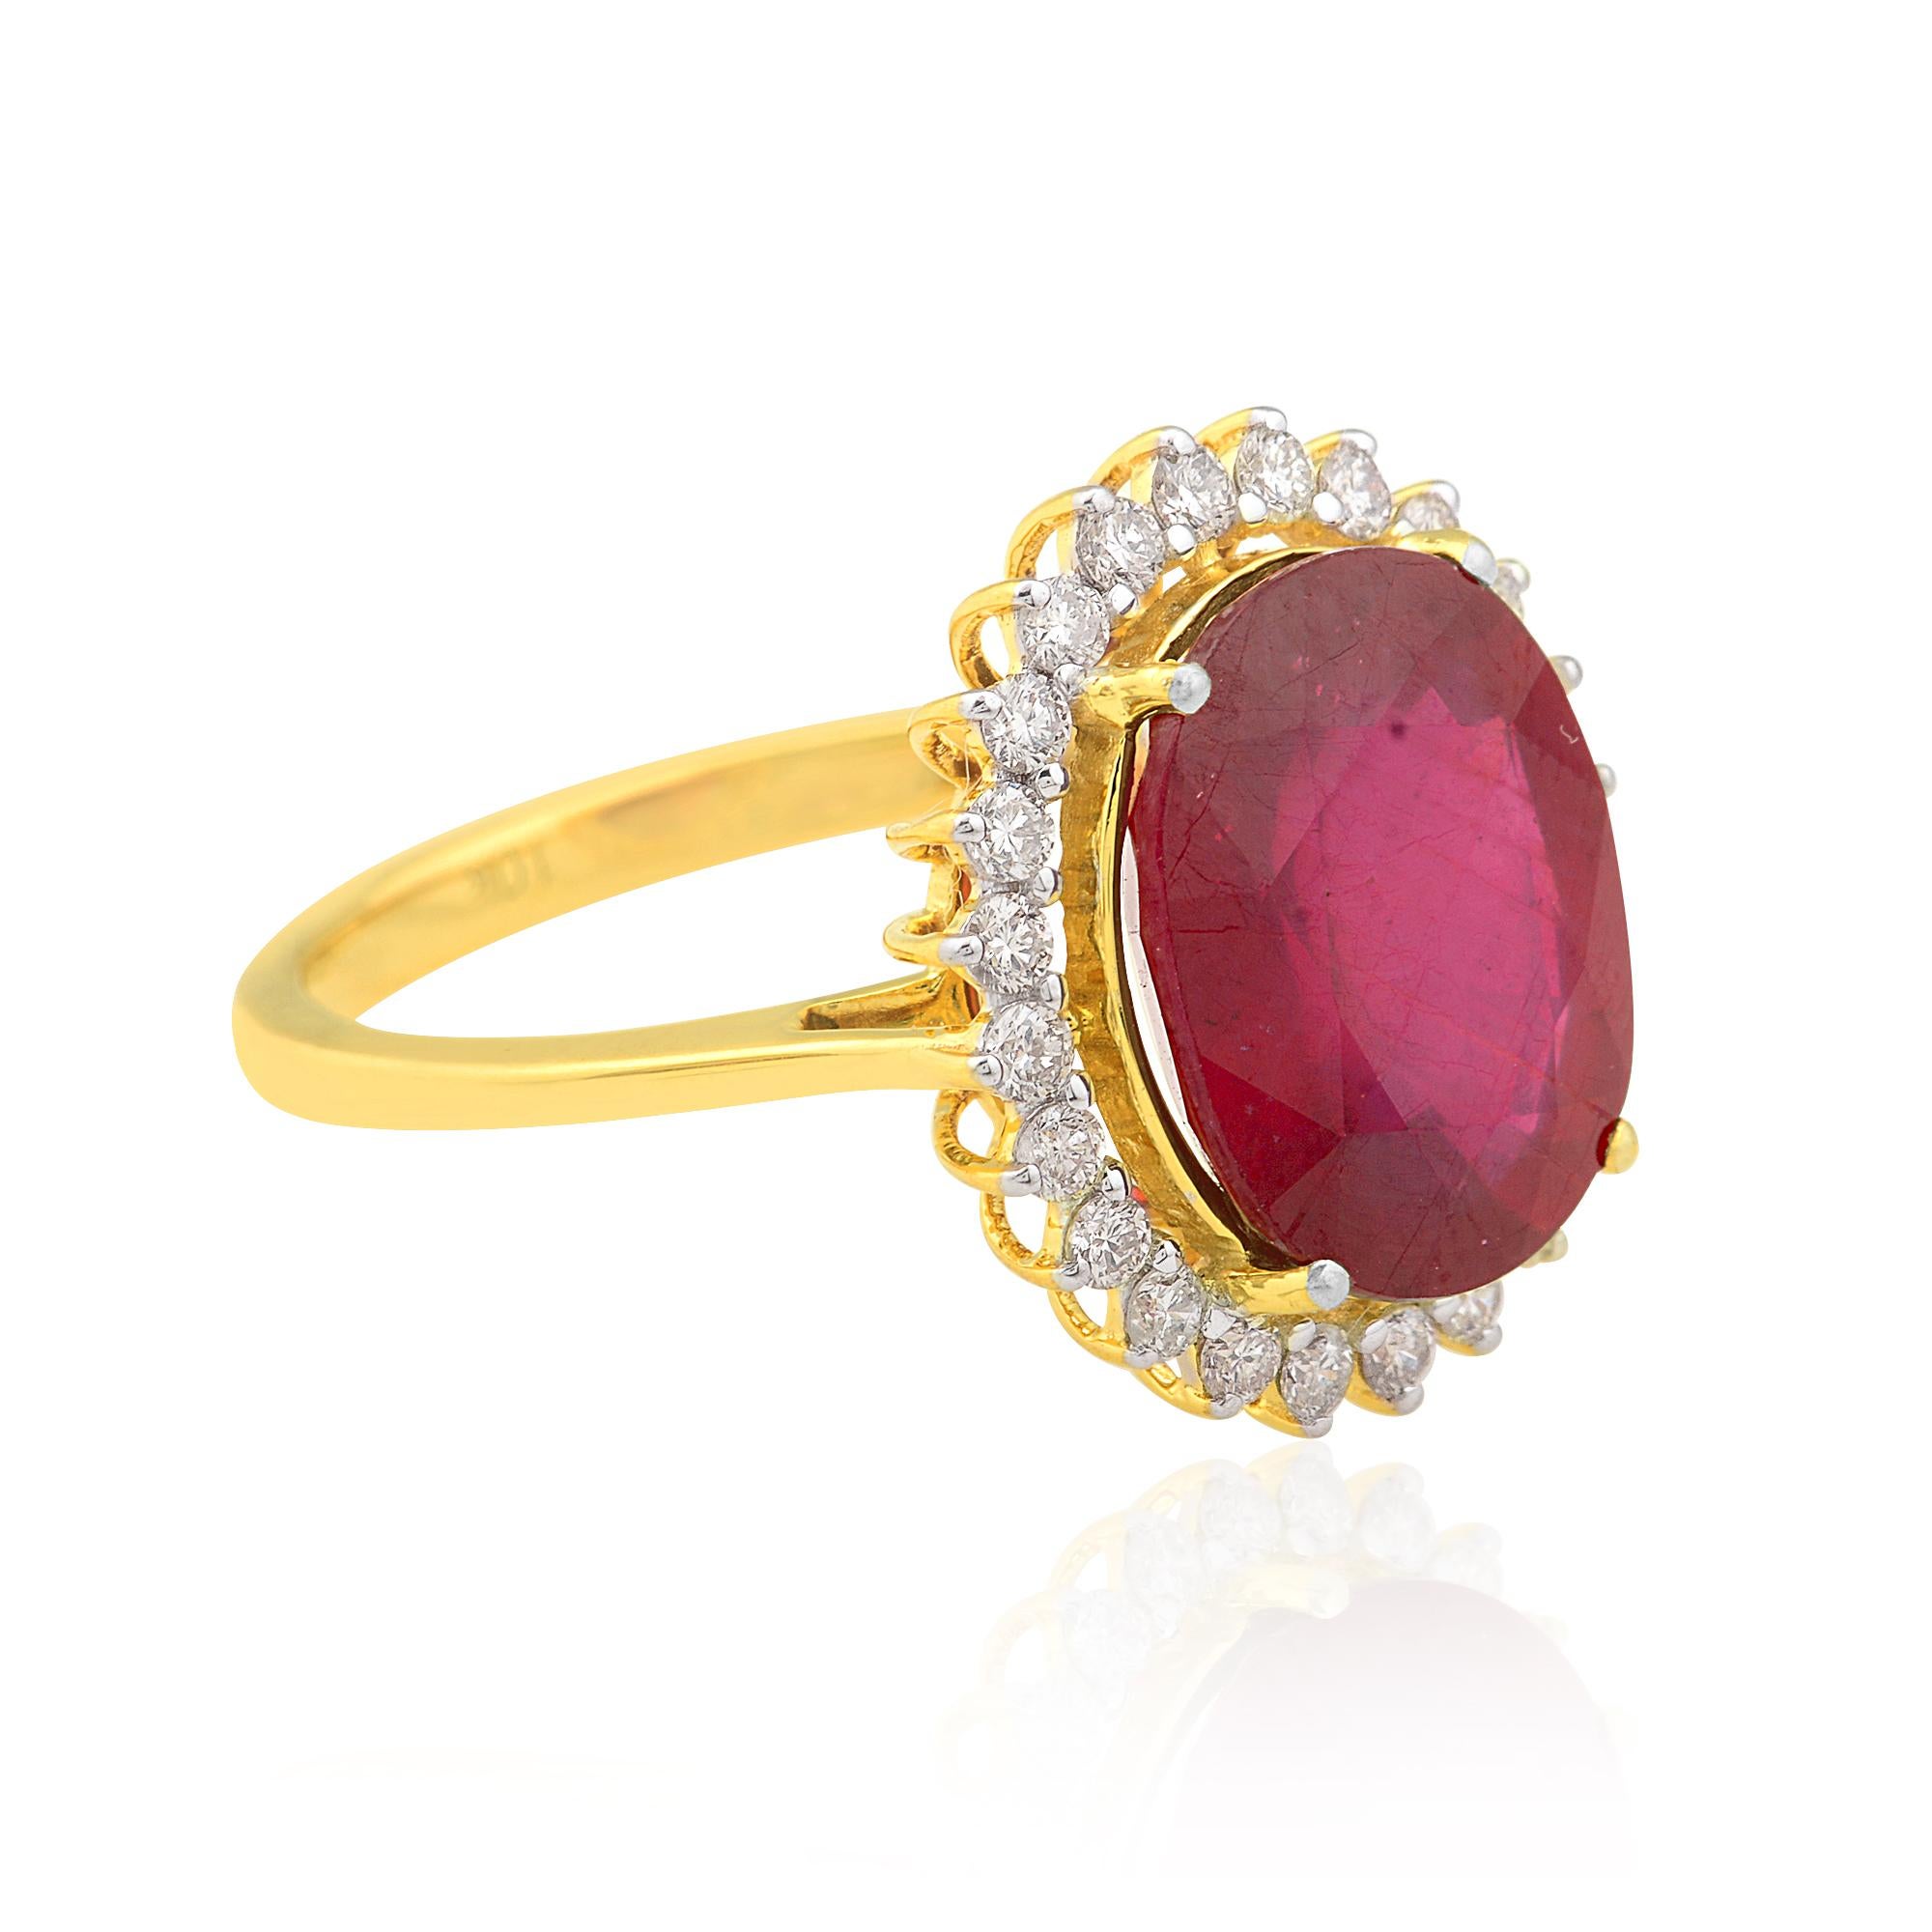 For Sale:  Oval Red Processed Gemstone Ring Diamond Solid 10K Yellow Gold Diamond Jewelry 2